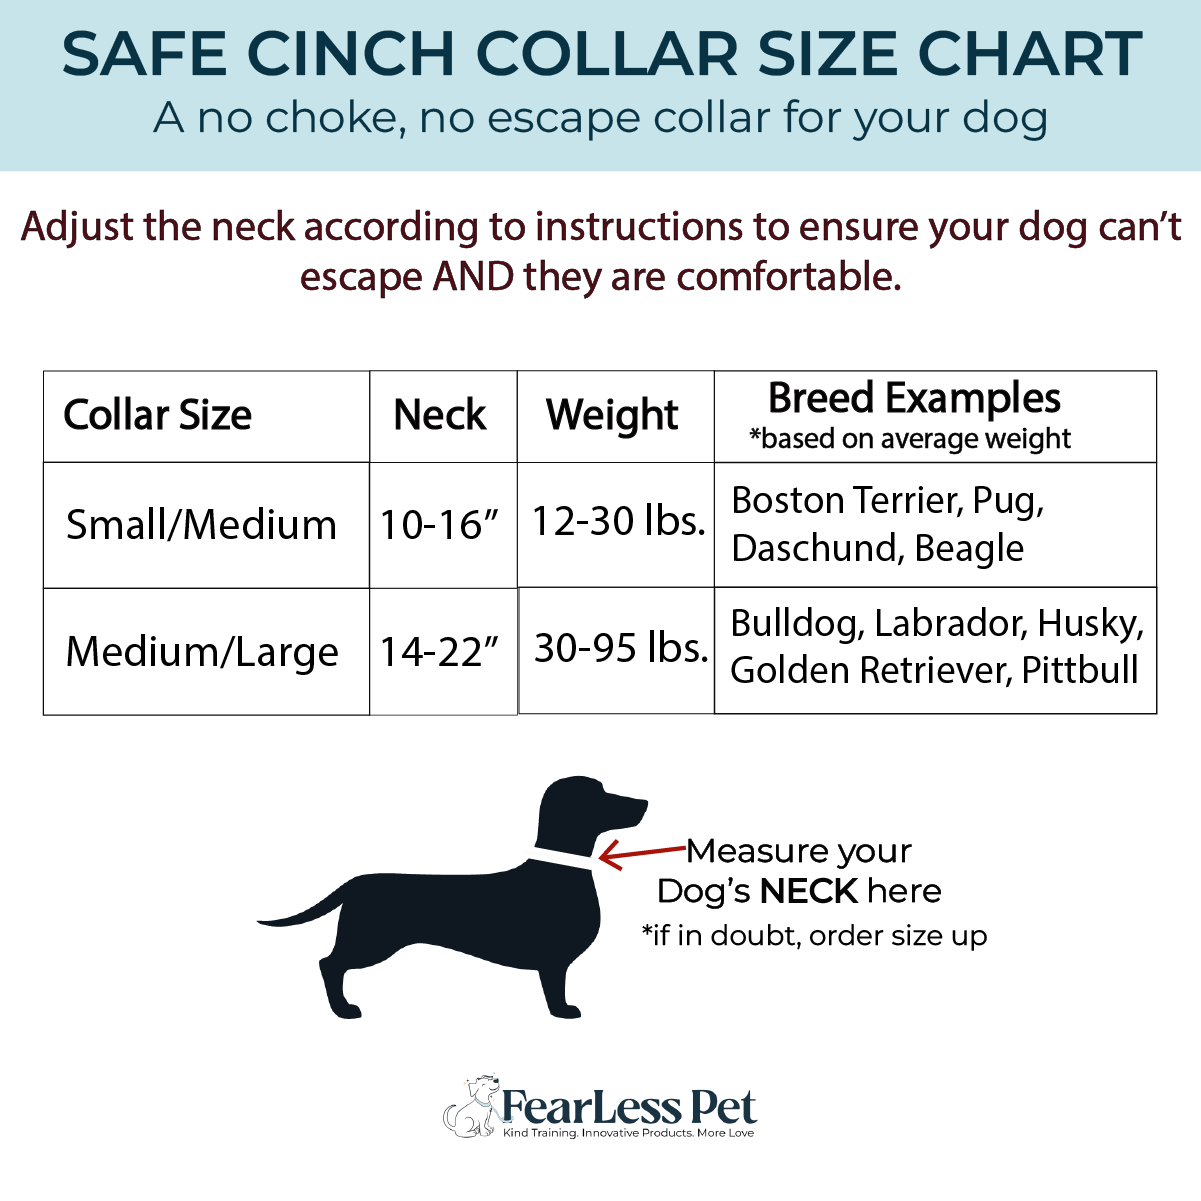 a size chart for small, medium and large escape proof dog collars from fearless pet. Boston terrier dog collar, pug dog collar, beagle dog collar